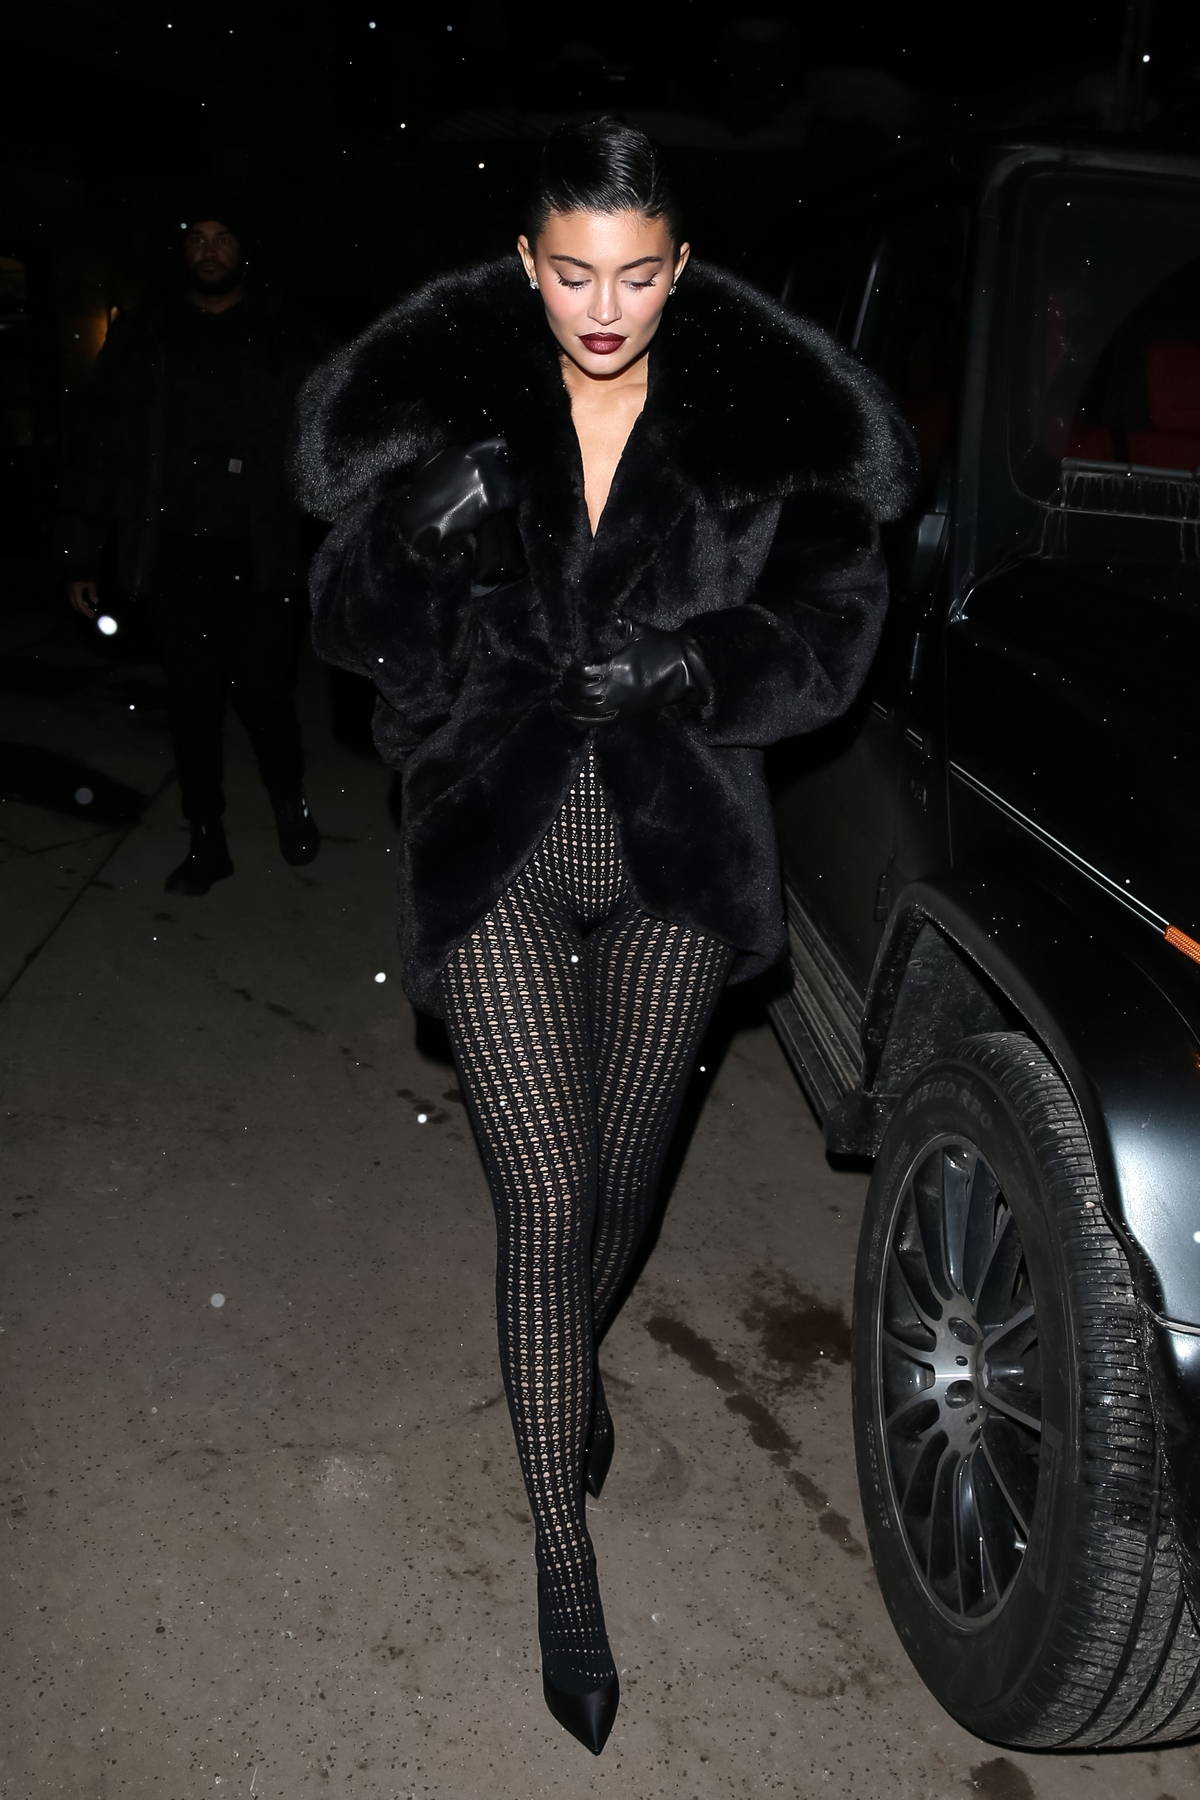 Kylie Jenner's Style: Her Favorite Winter Jumpsuit Is So